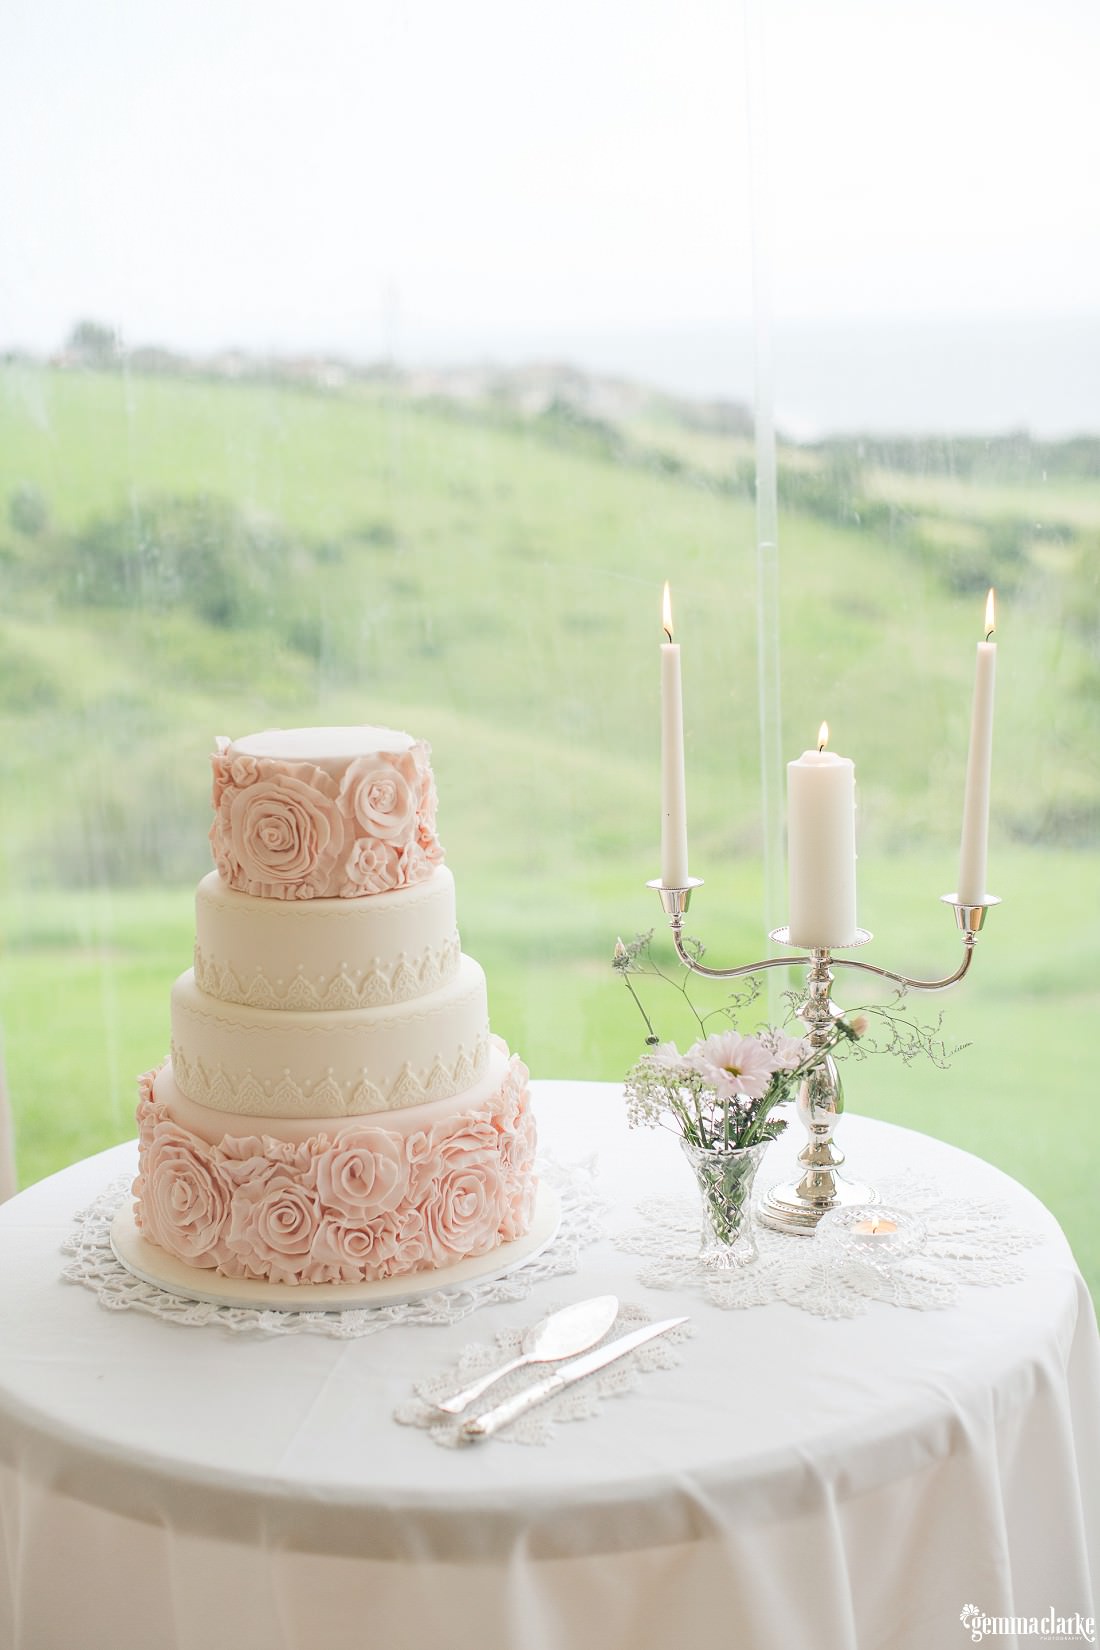 Pink and ivory four-tier wedding cake with rose embossed icing - Bush Bank Wedding